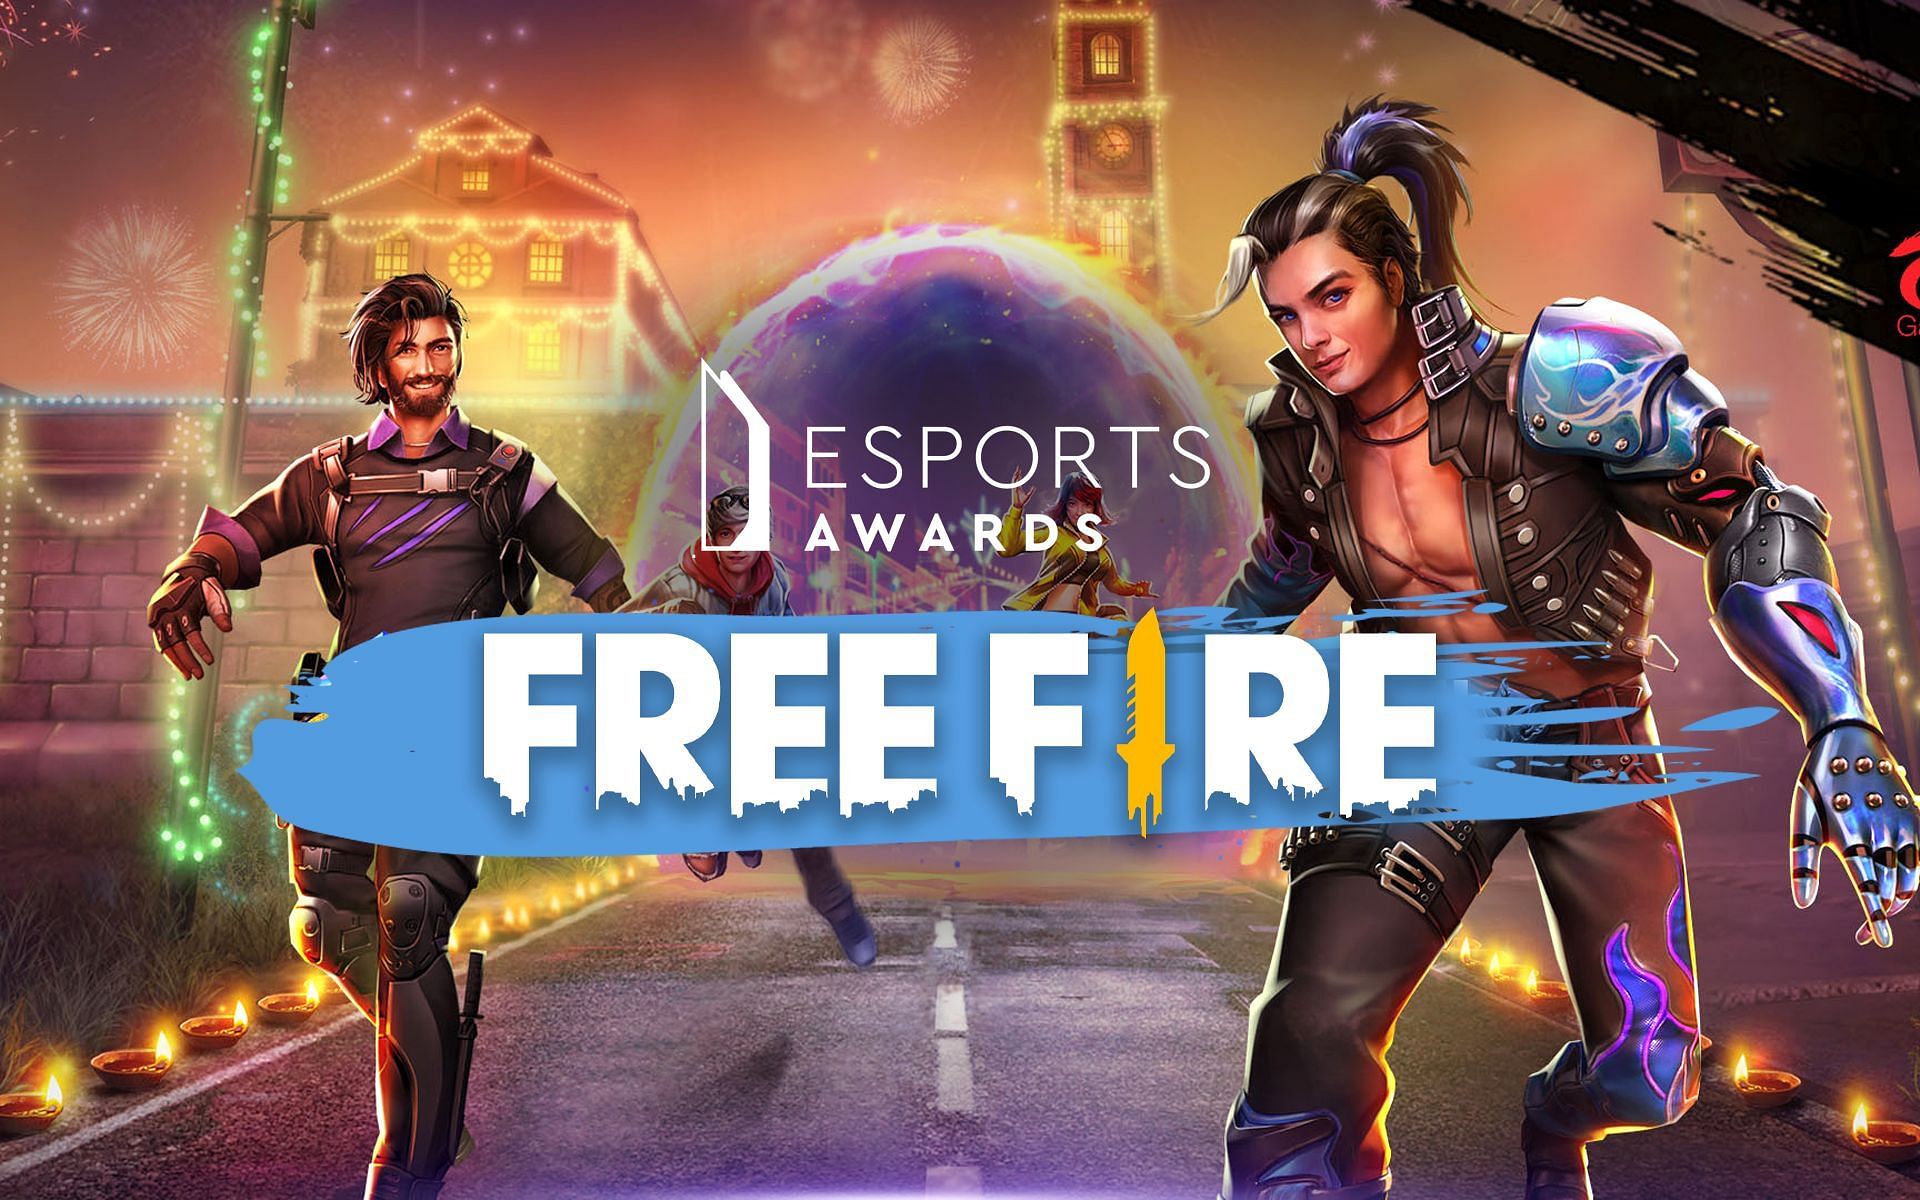 Free Fire wins Esports Mobile Game of the Year at Esports